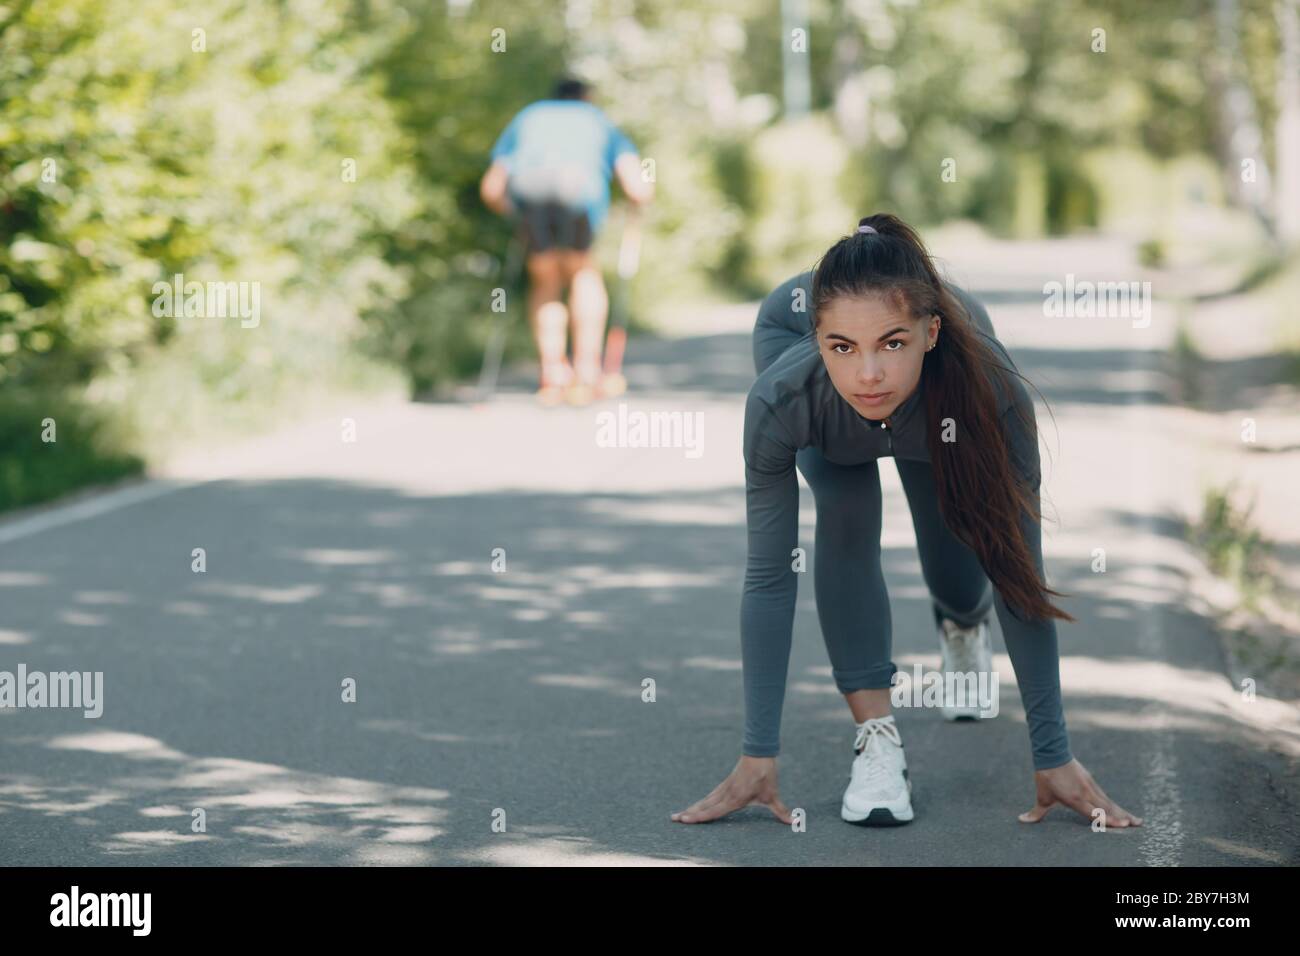 Running girl in city park. Young positive woman runner outdoor jogging. Stock Photo